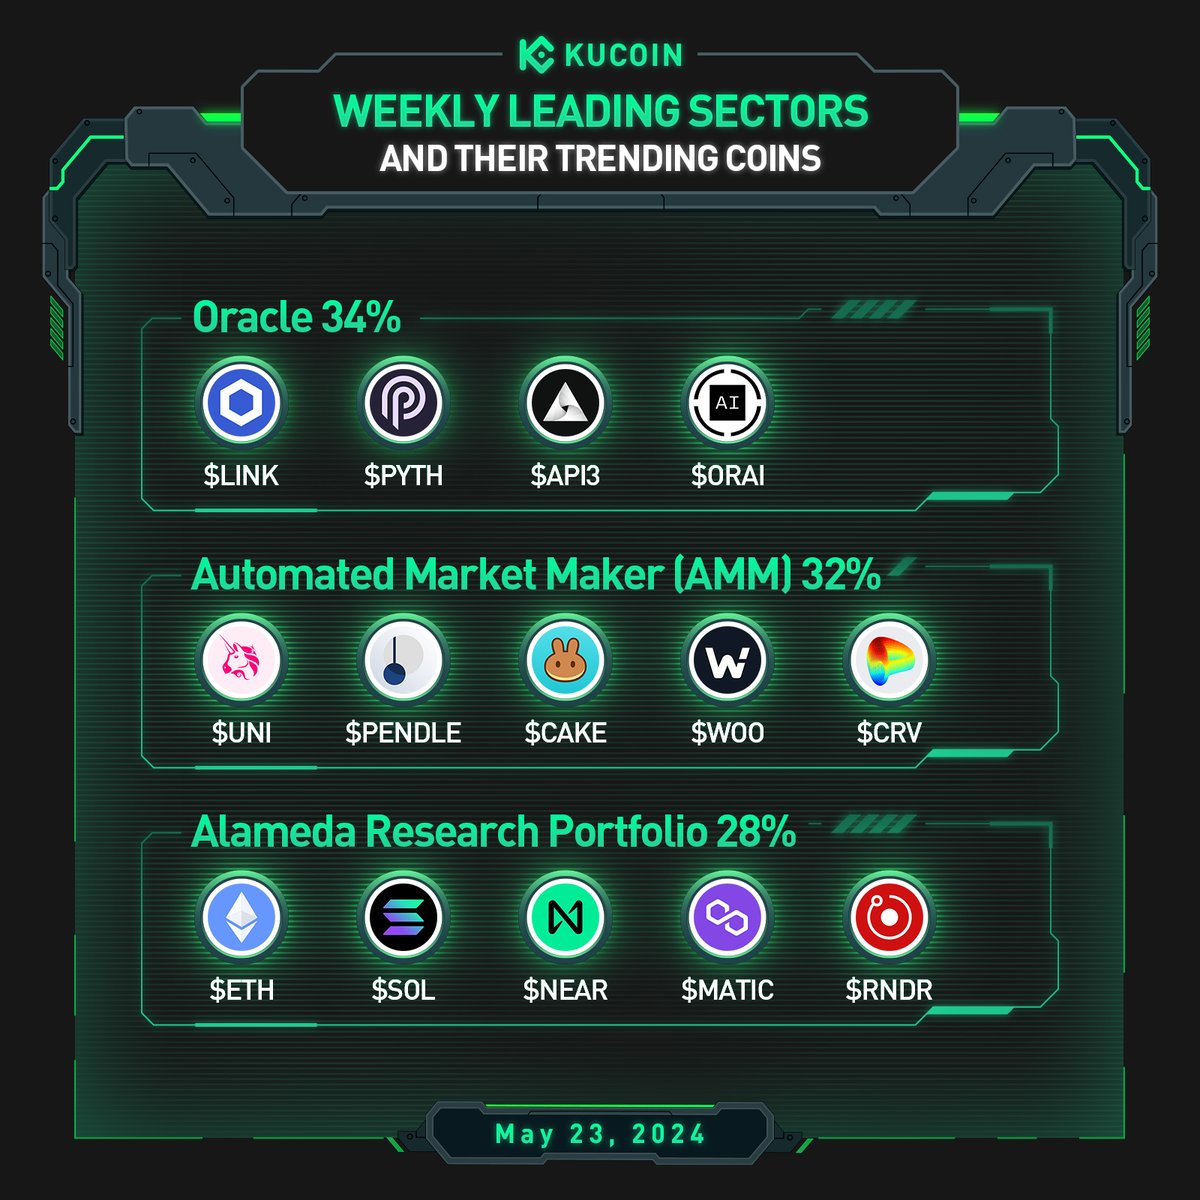 Check out the Weekly Leading Sectors on #KuCoin and their Trending Coins (May 23, 2024) ⤵️ 🔥 Oracle - $LINK, $PYTH, #API3, $ORAI 🔥 Automated Market Maker (AMM) - $UNI, $PENDLE, $CAKE, $WOO, $CRV 🔥 Alameda Research Portfolio - $ETH, $SOL, $NEAR, $MATIC, $RNDR